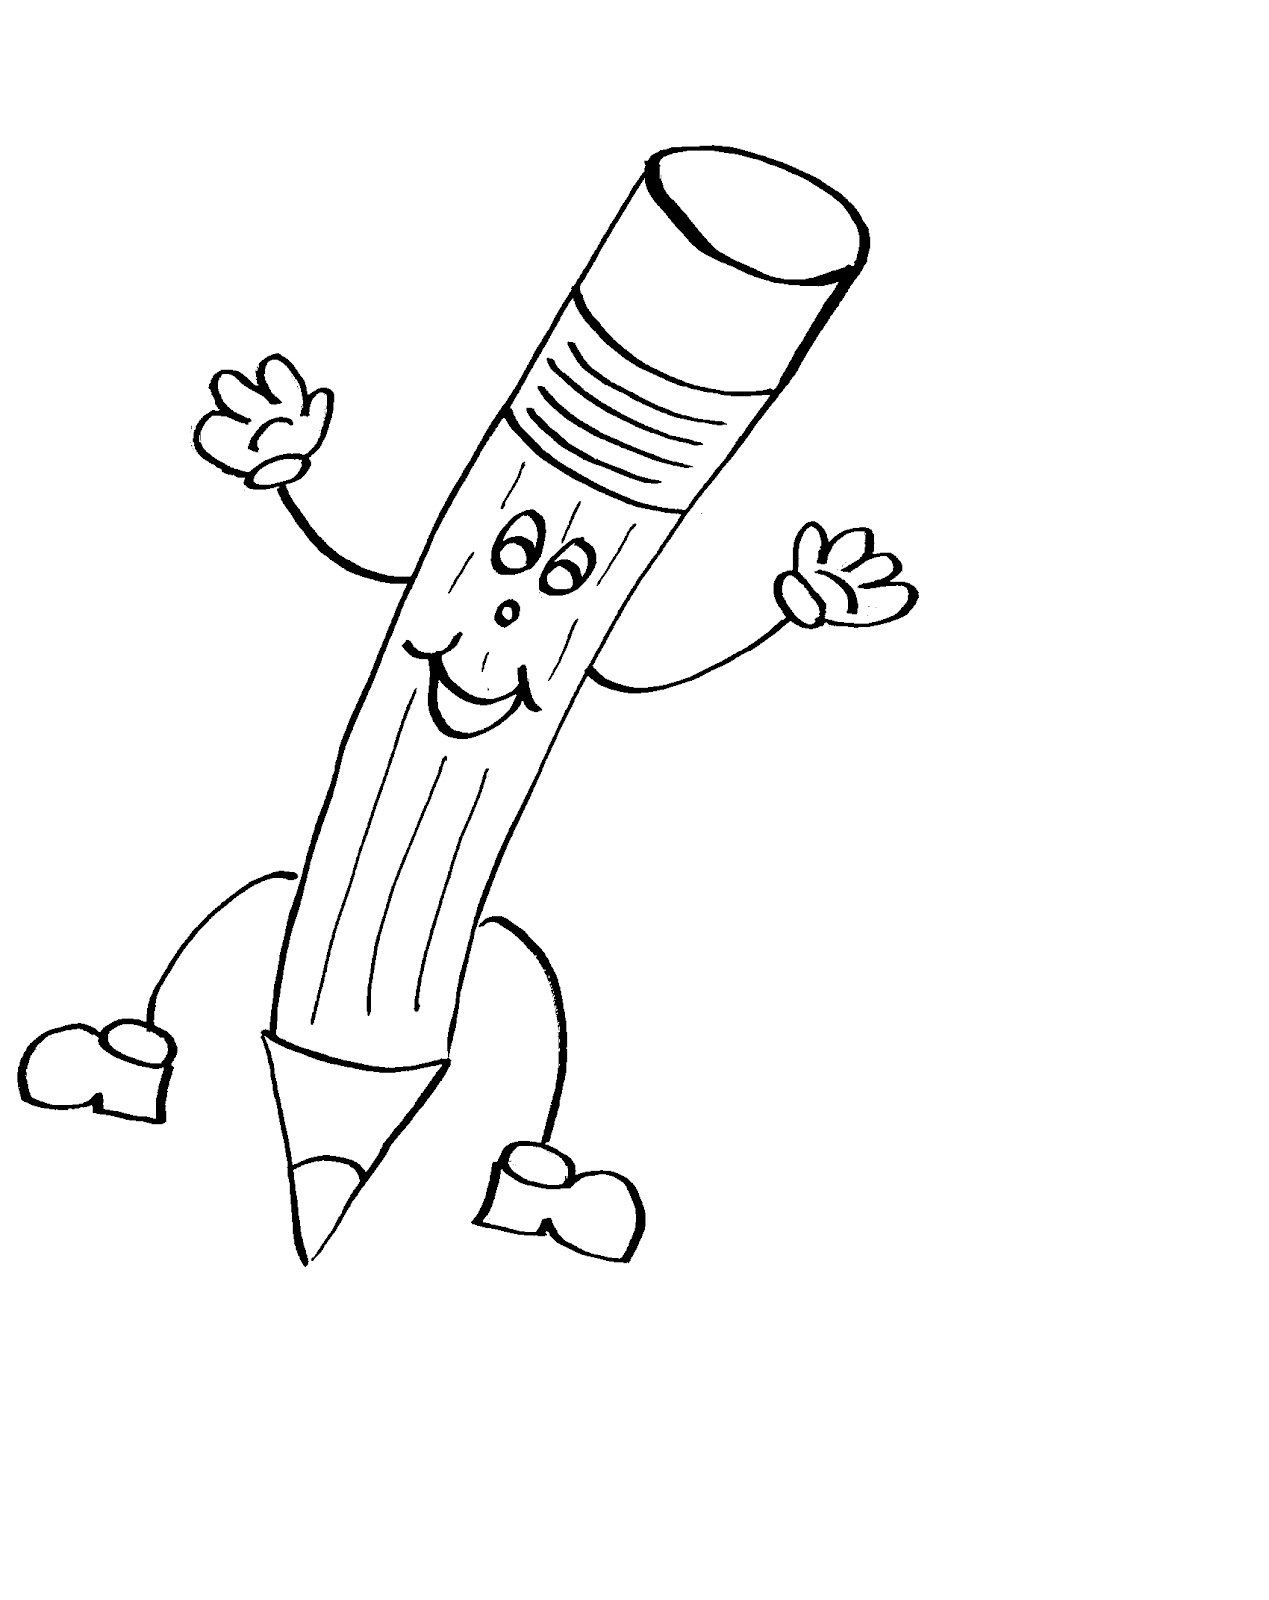 Colored Pencils coloring page  Free Printable Coloring Pages